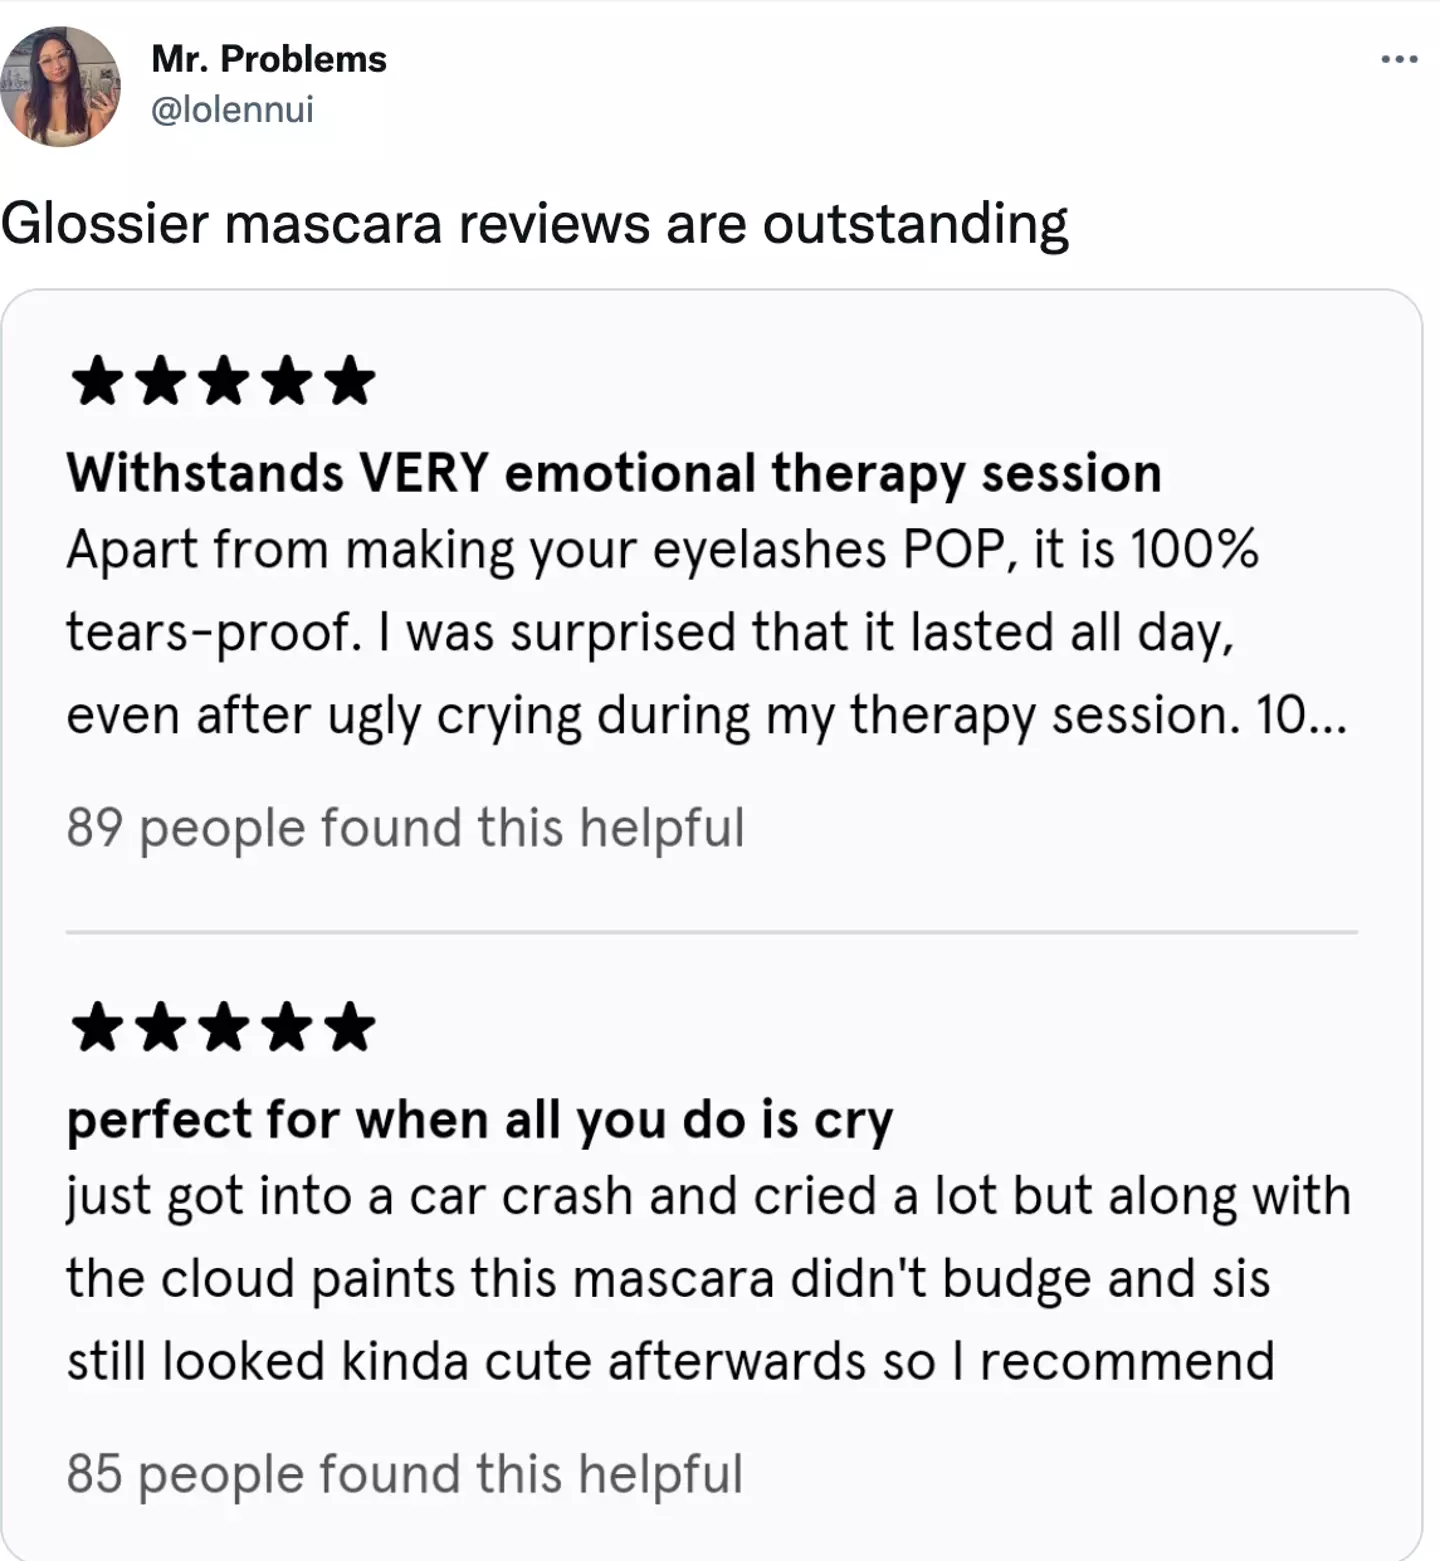 The internet thinks Glossier reviews are 'outstanding' (